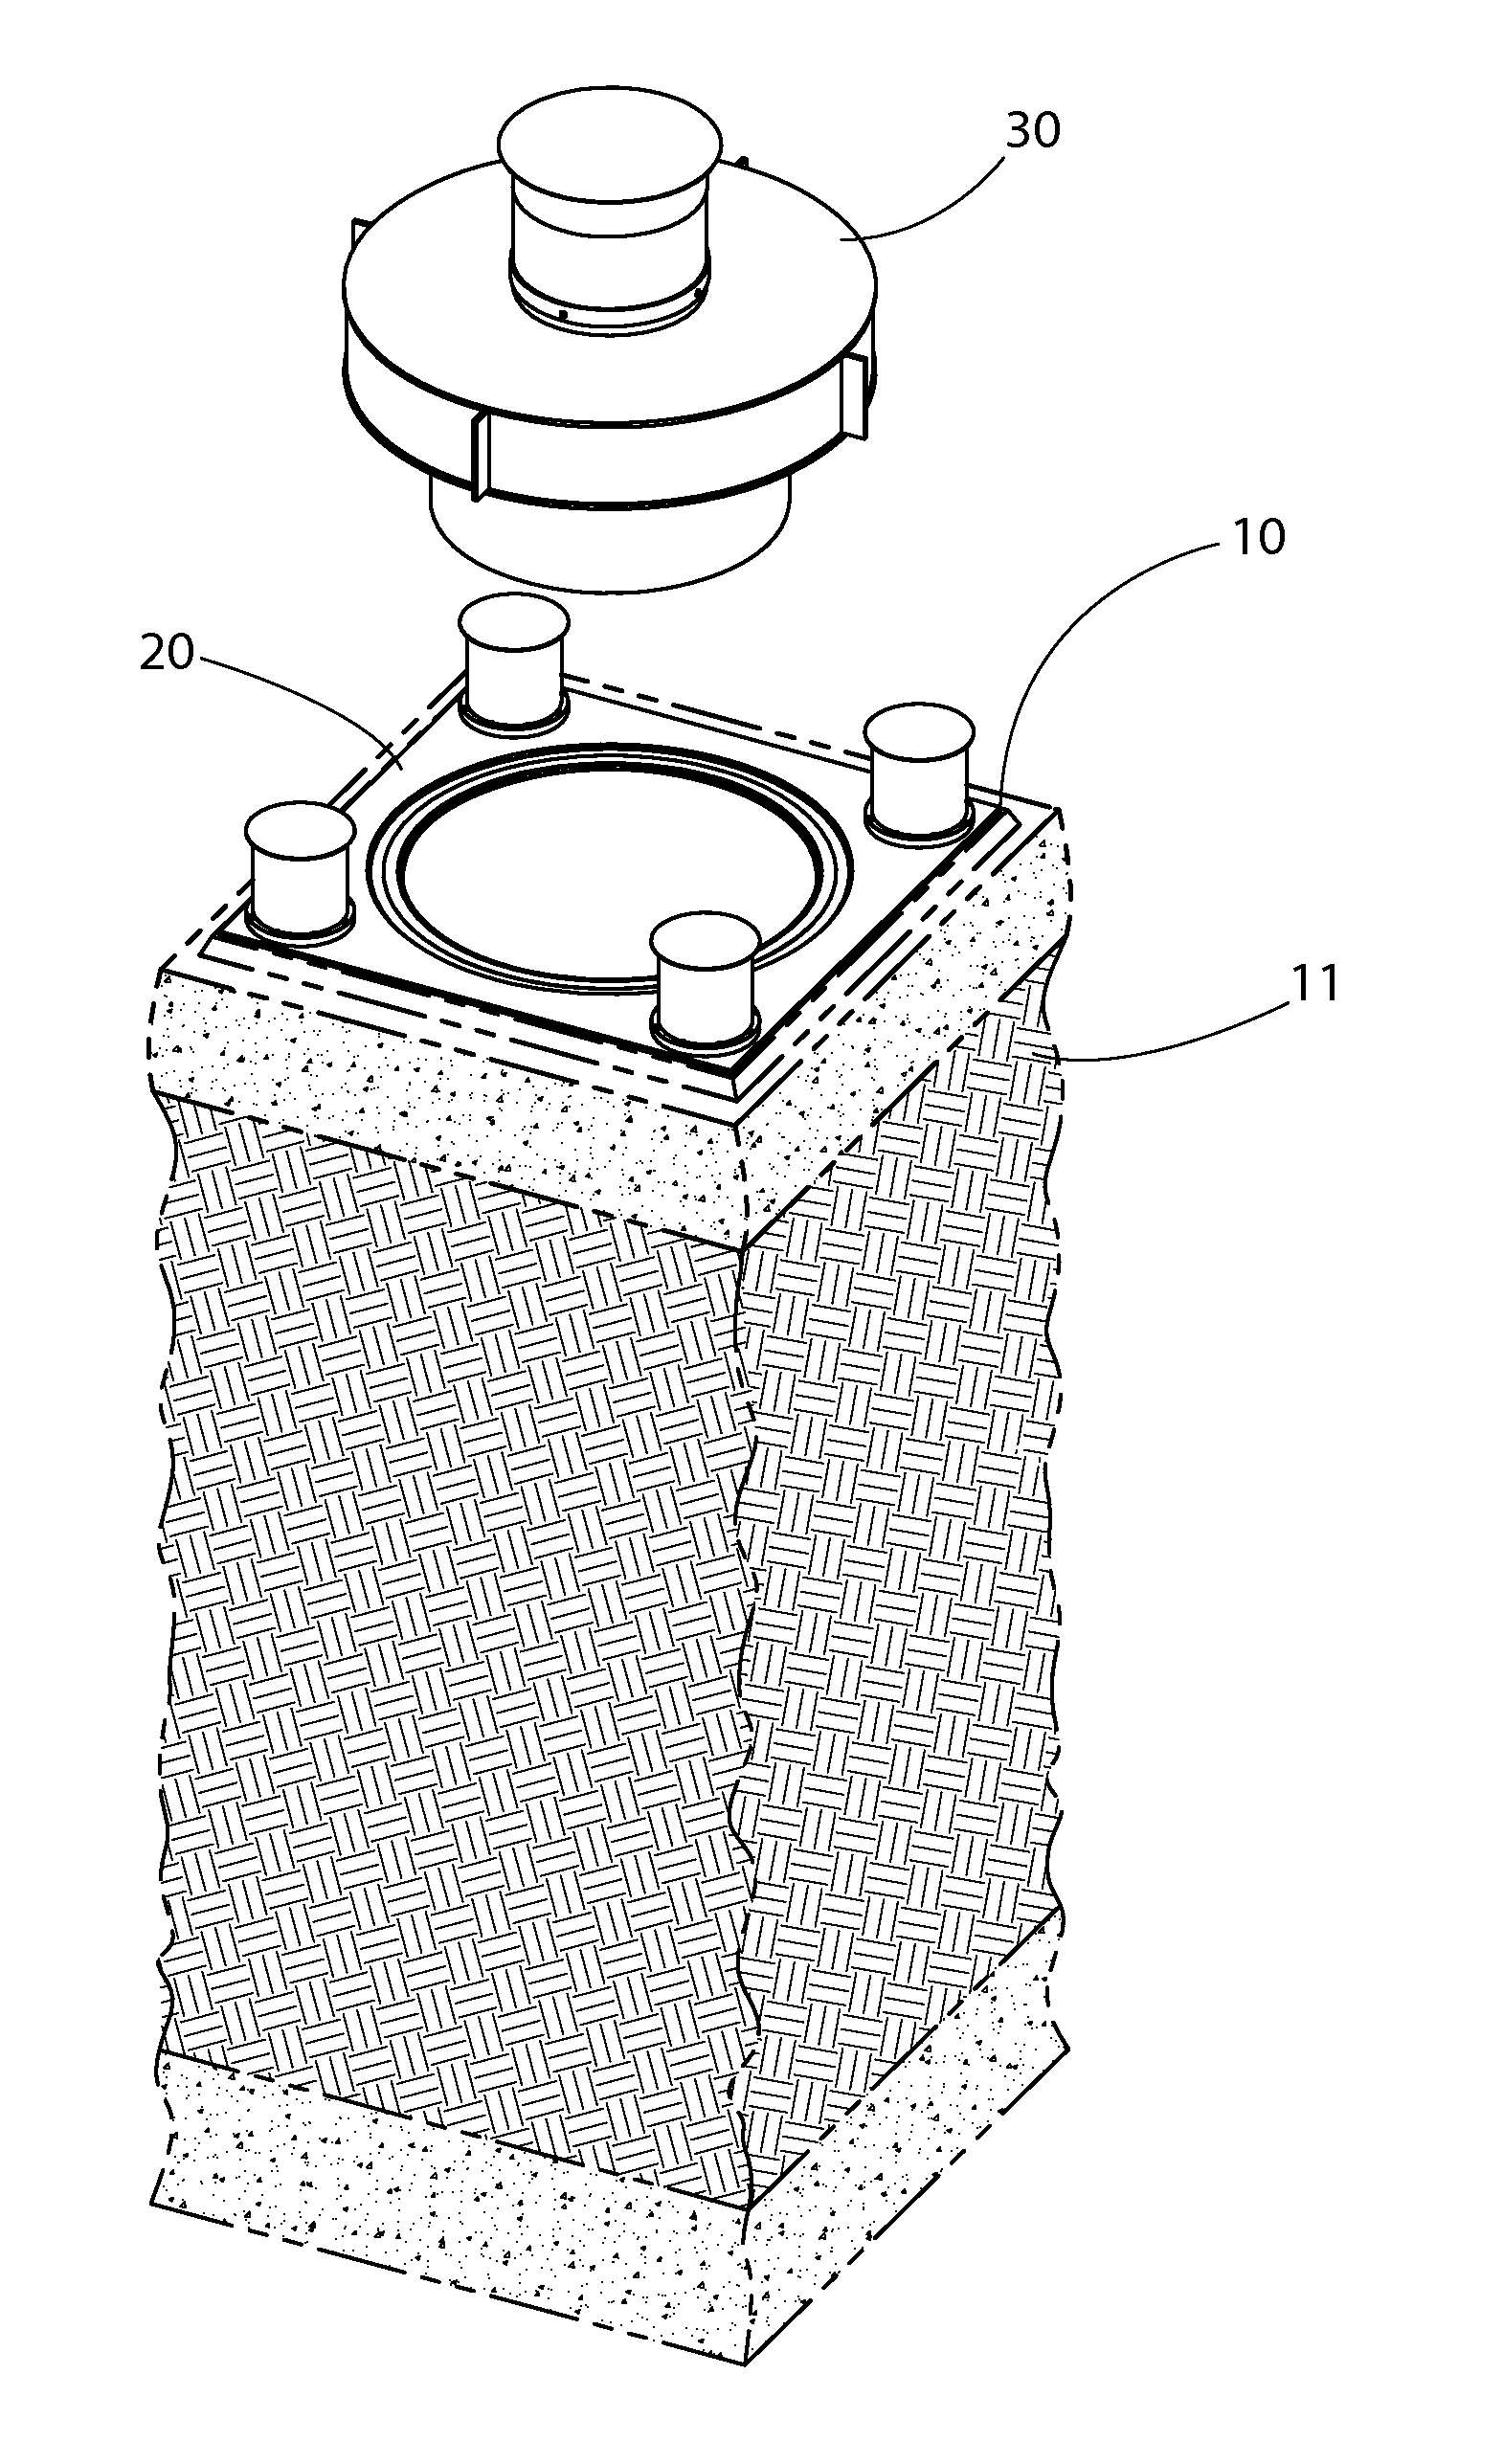 System and method of storing and/or transferring high level radioactive waste